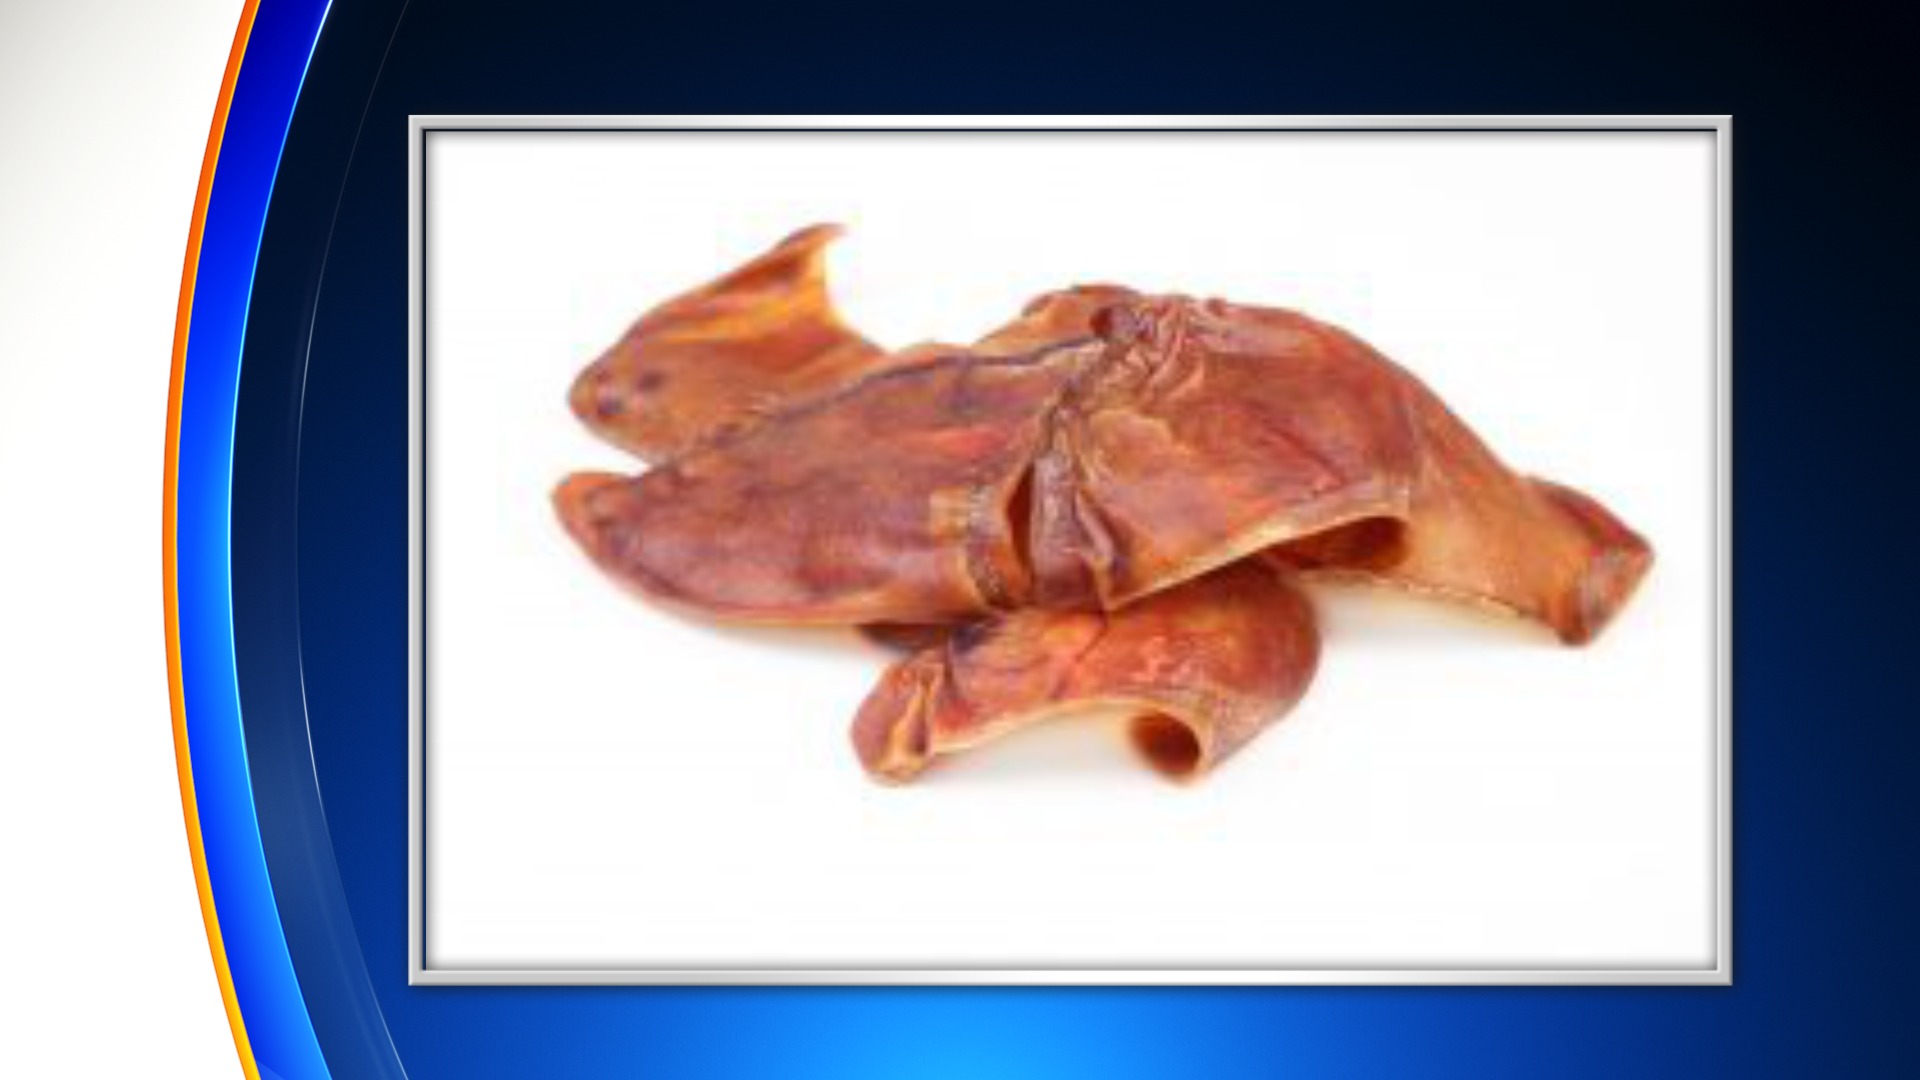 New Salmonella Outbreak Could Be Caused By Pig Ear Dog Treats, CDC Says